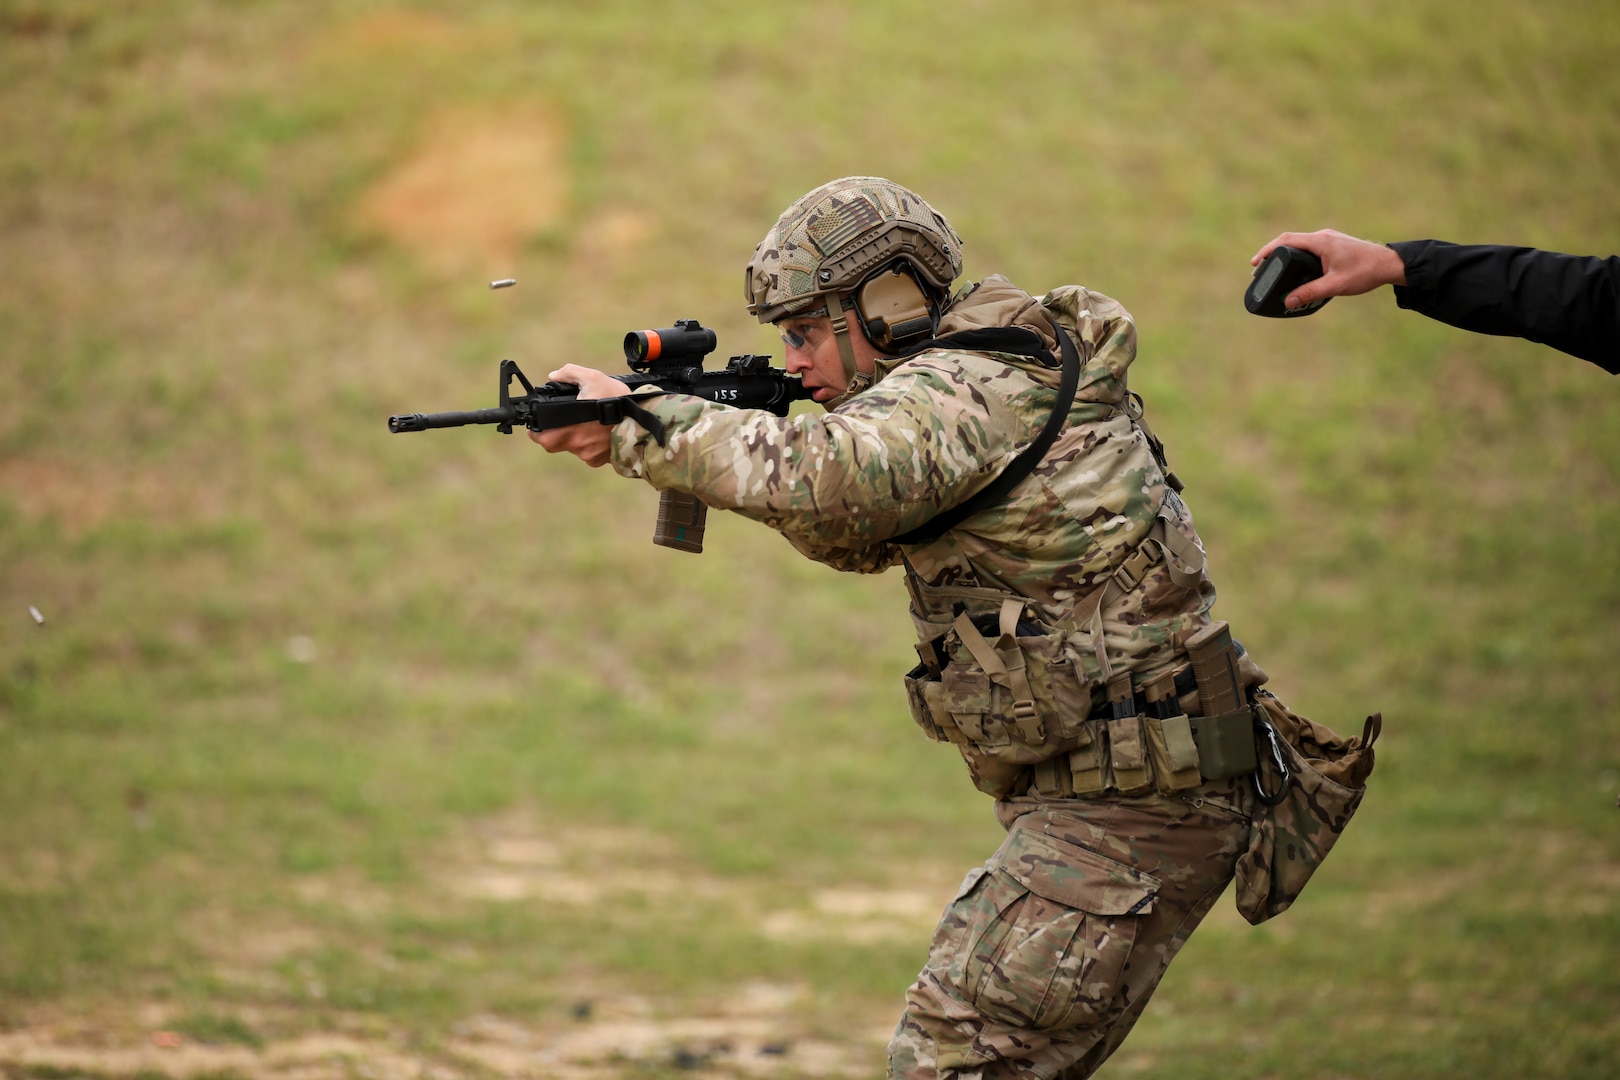 Sgt. 1st Class Chris Catlin, an infantryman with the Colorado National Guard’s Centennial Training Site, fires his M4 carbine while a grader keeps time during the multi-gun match at the 2021 U.S. Army “All Army” Small Arms Championships at Fort Benning, Georgia, March 14-20, 2021.